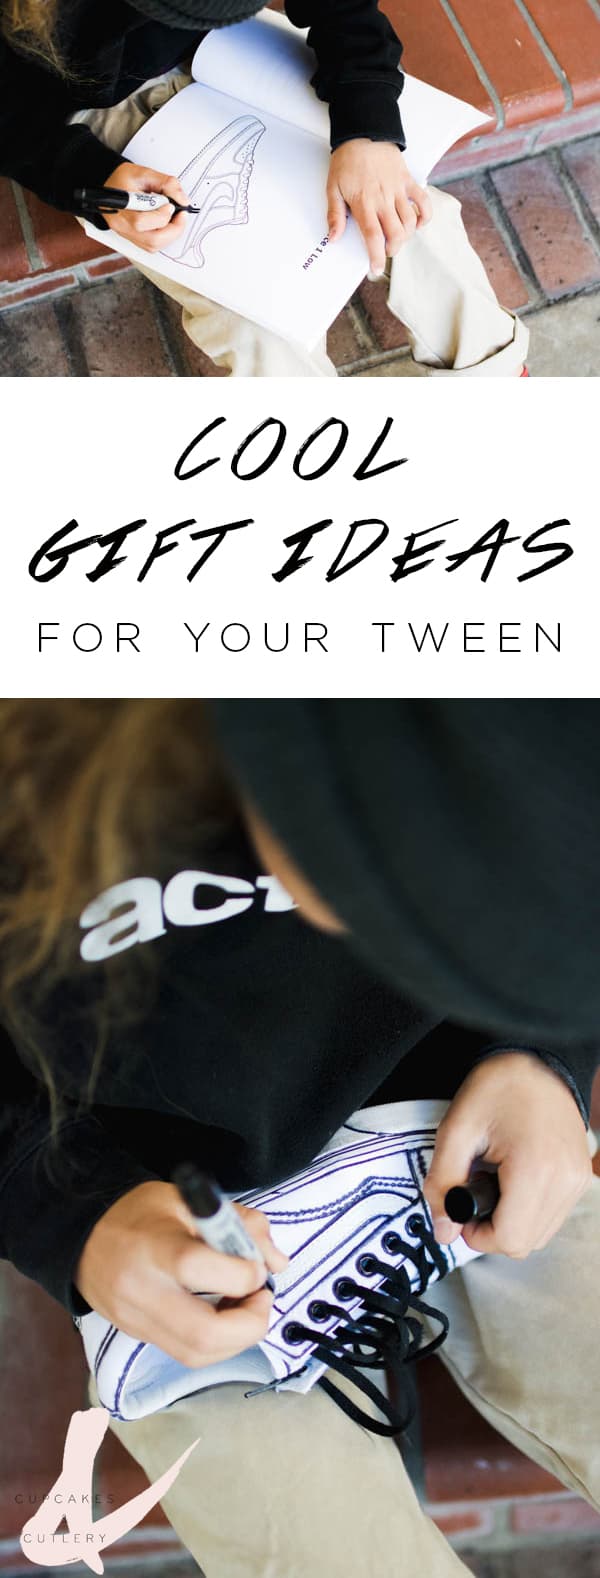 Cool gift ideas for tween boys with text overlay.